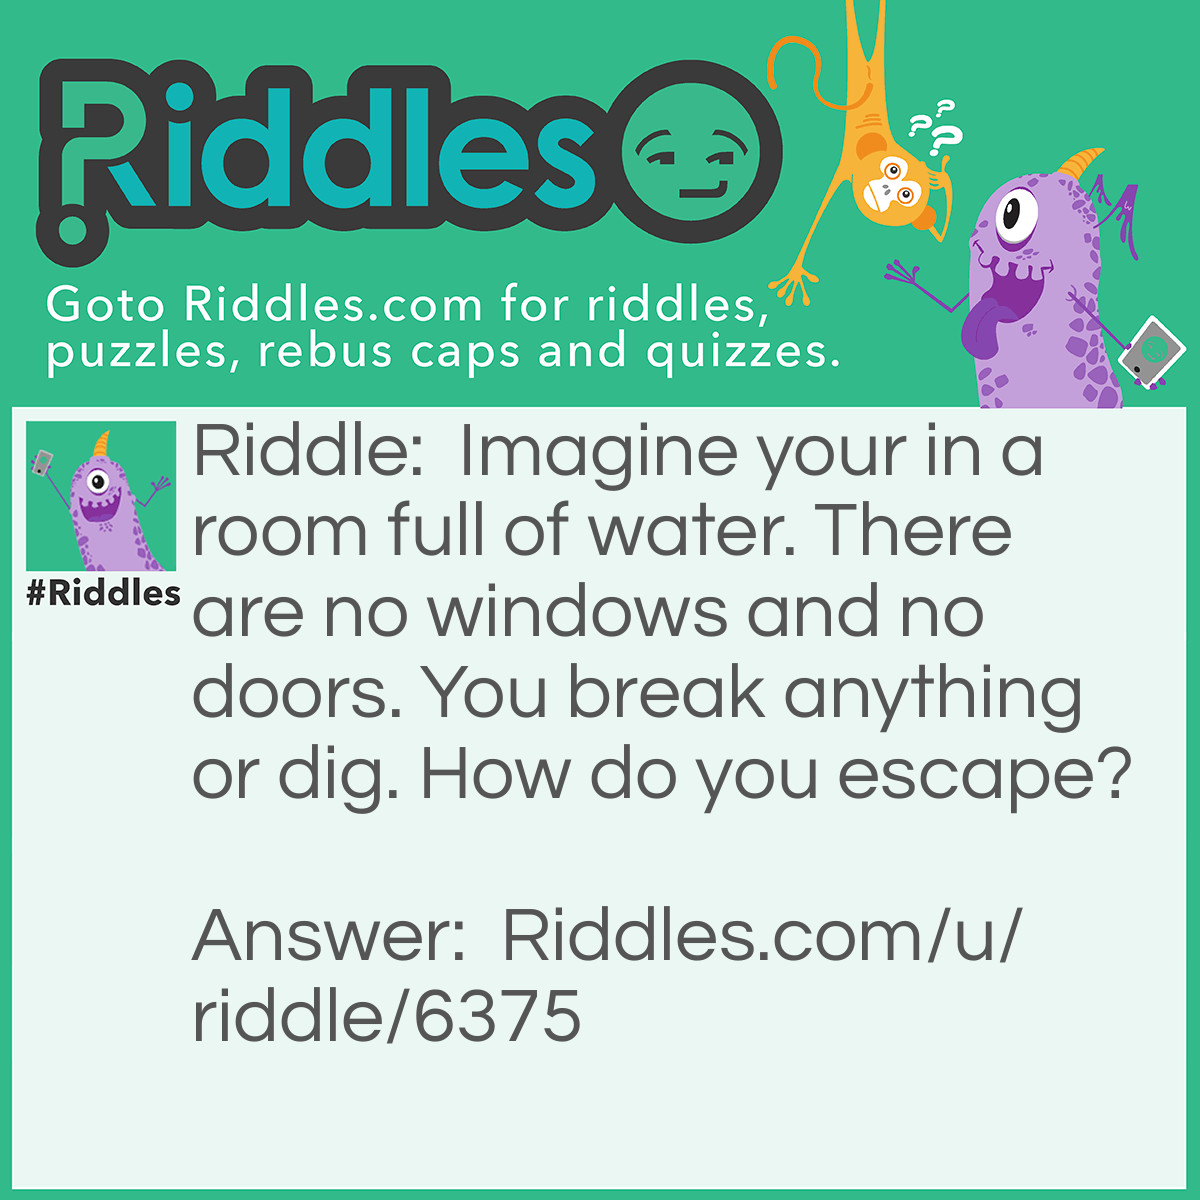 Riddle: Imagine your in a room full of water. There are no windows and no doors. You break anything or dig. How do you escape? Answer: Stop imagining.